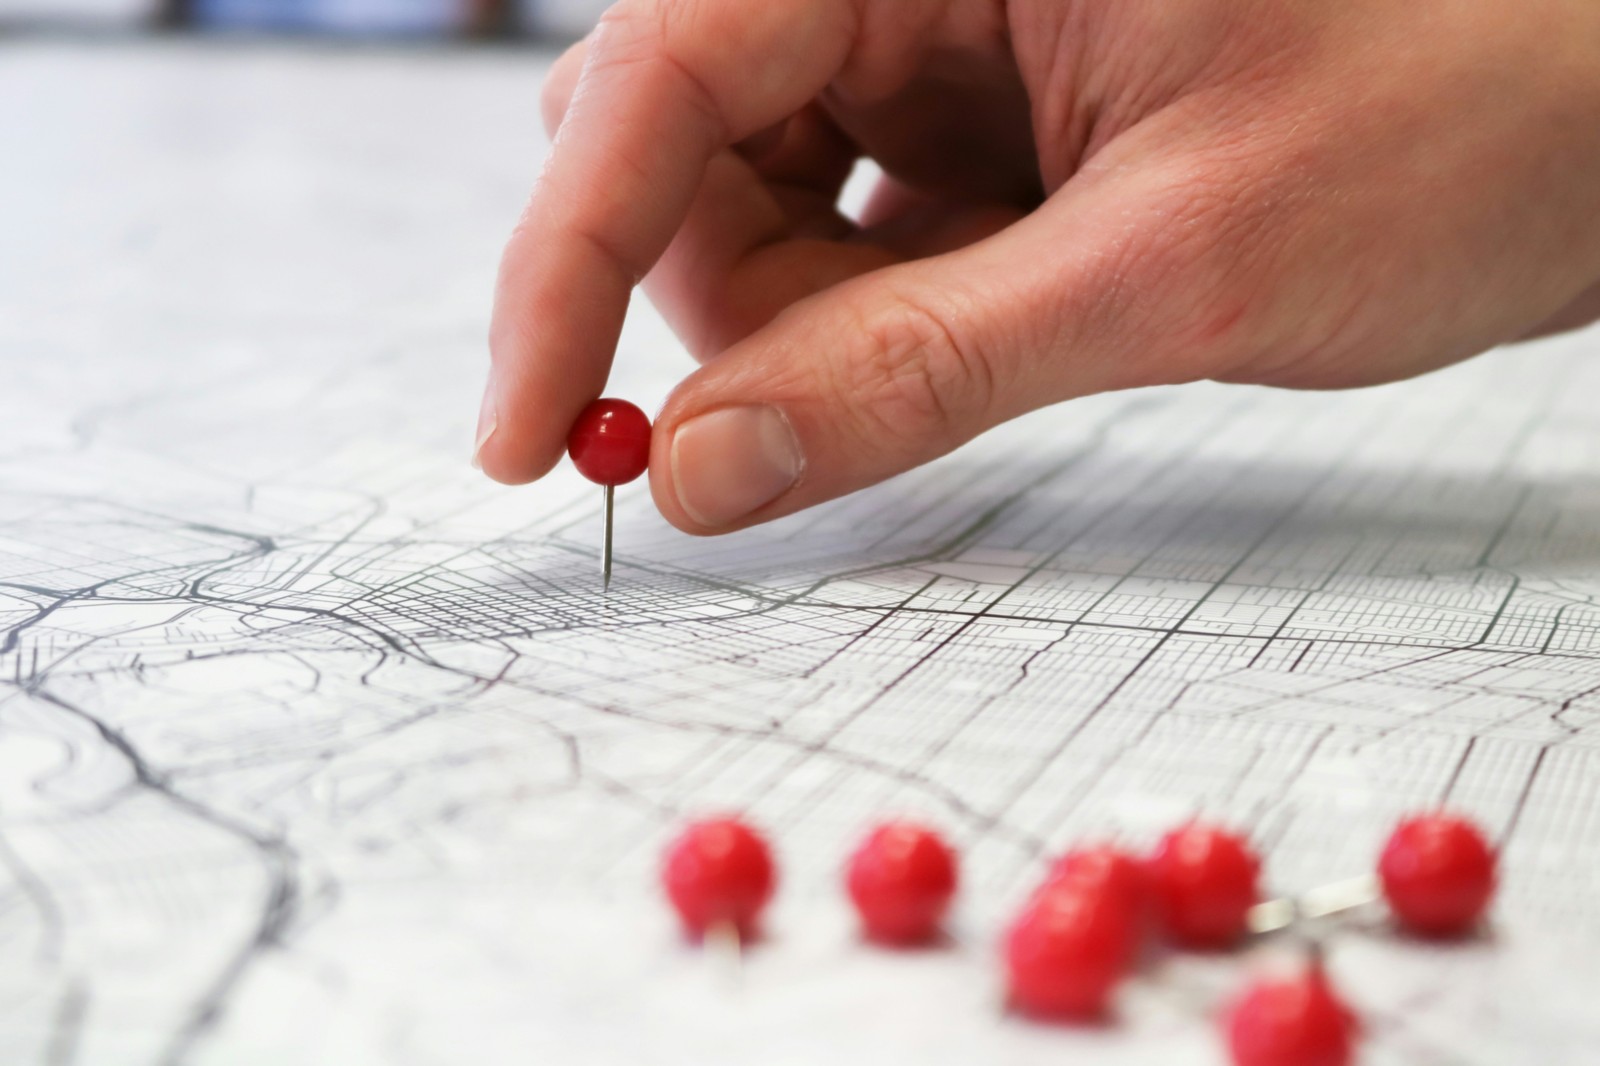 hand placing a red pin on a map